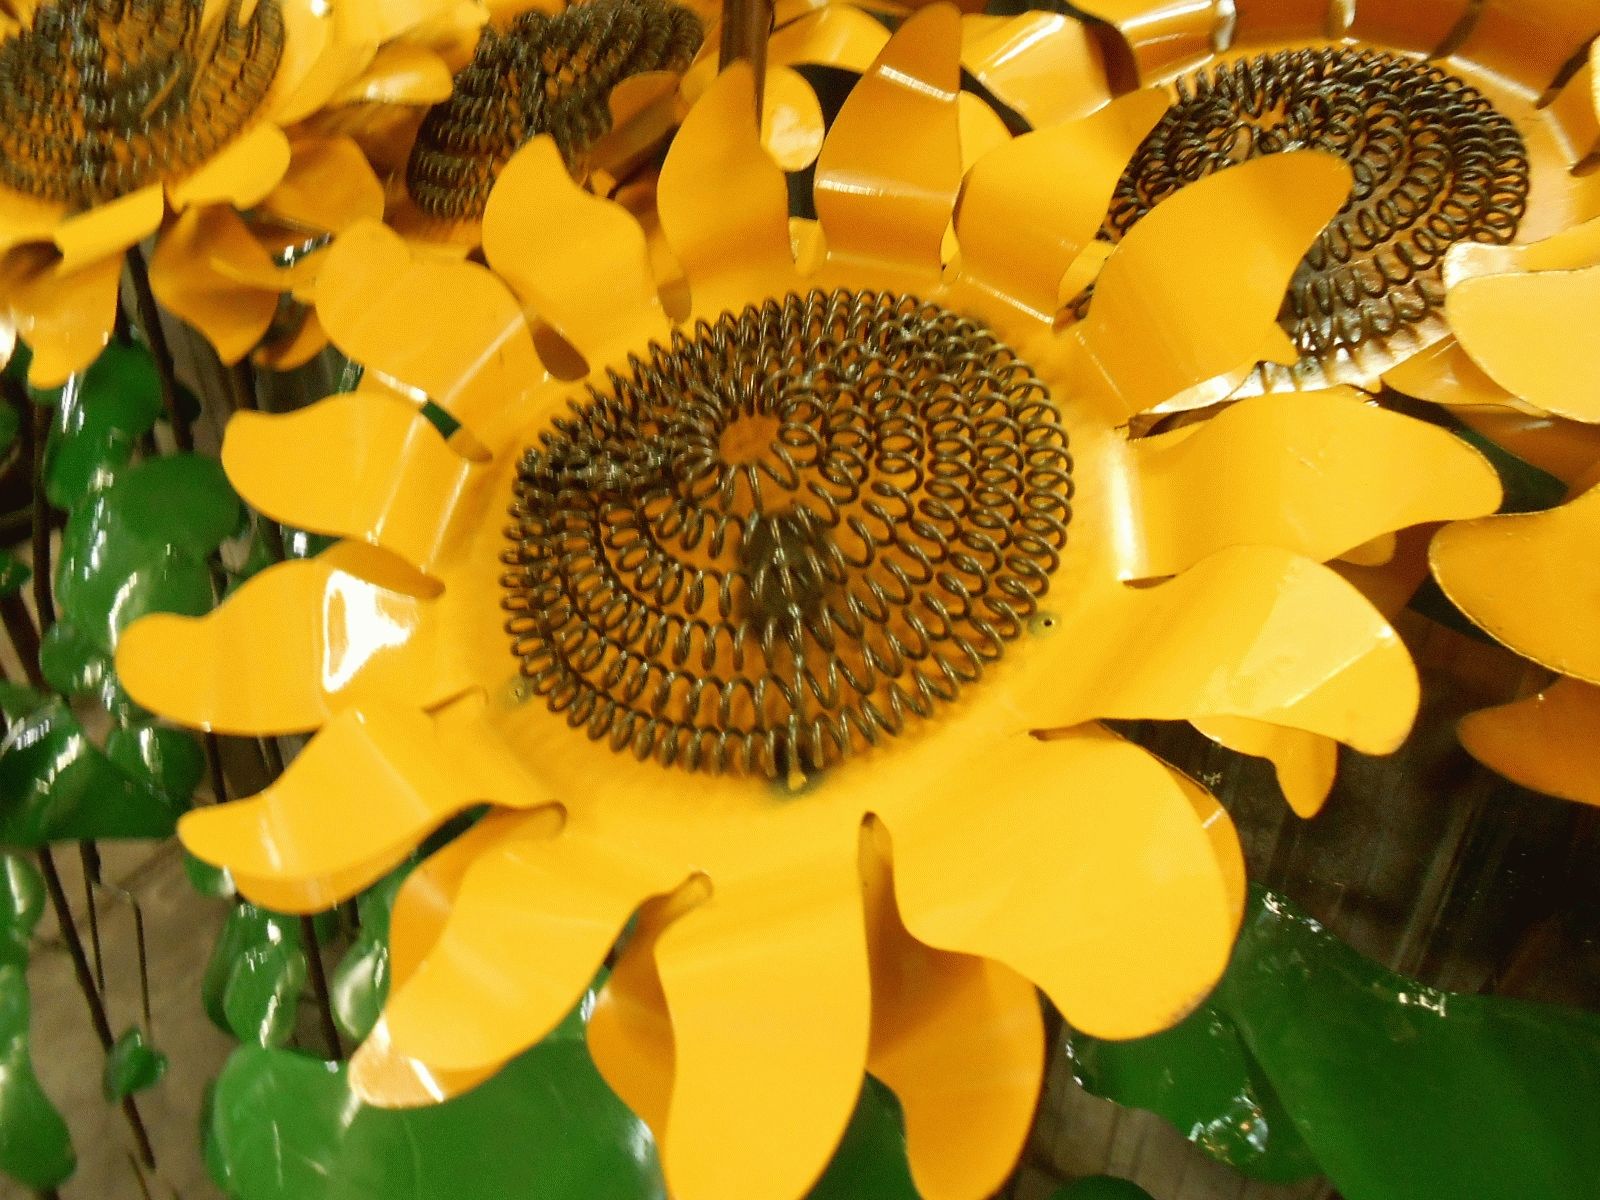 67" Recycled Metal Giant Sunflower Stake – Yard Decor Throughout Metal Sunflower Yard Art (View 10 of 20)